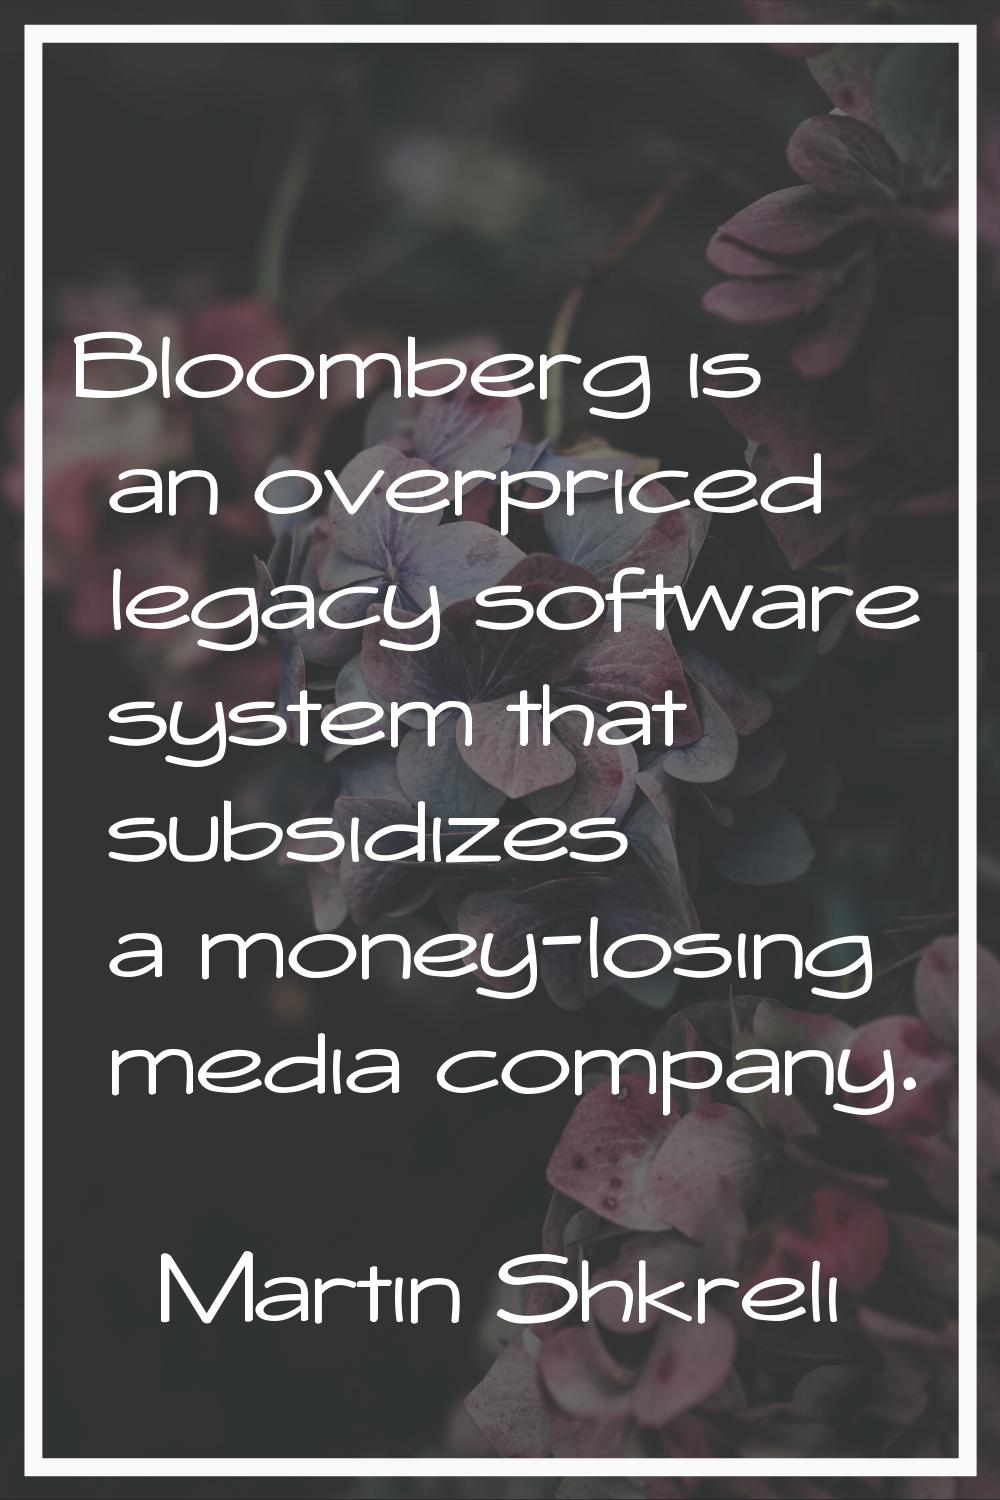 Bloomberg is an overpriced legacy software system that subsidizes a money-losing media company.